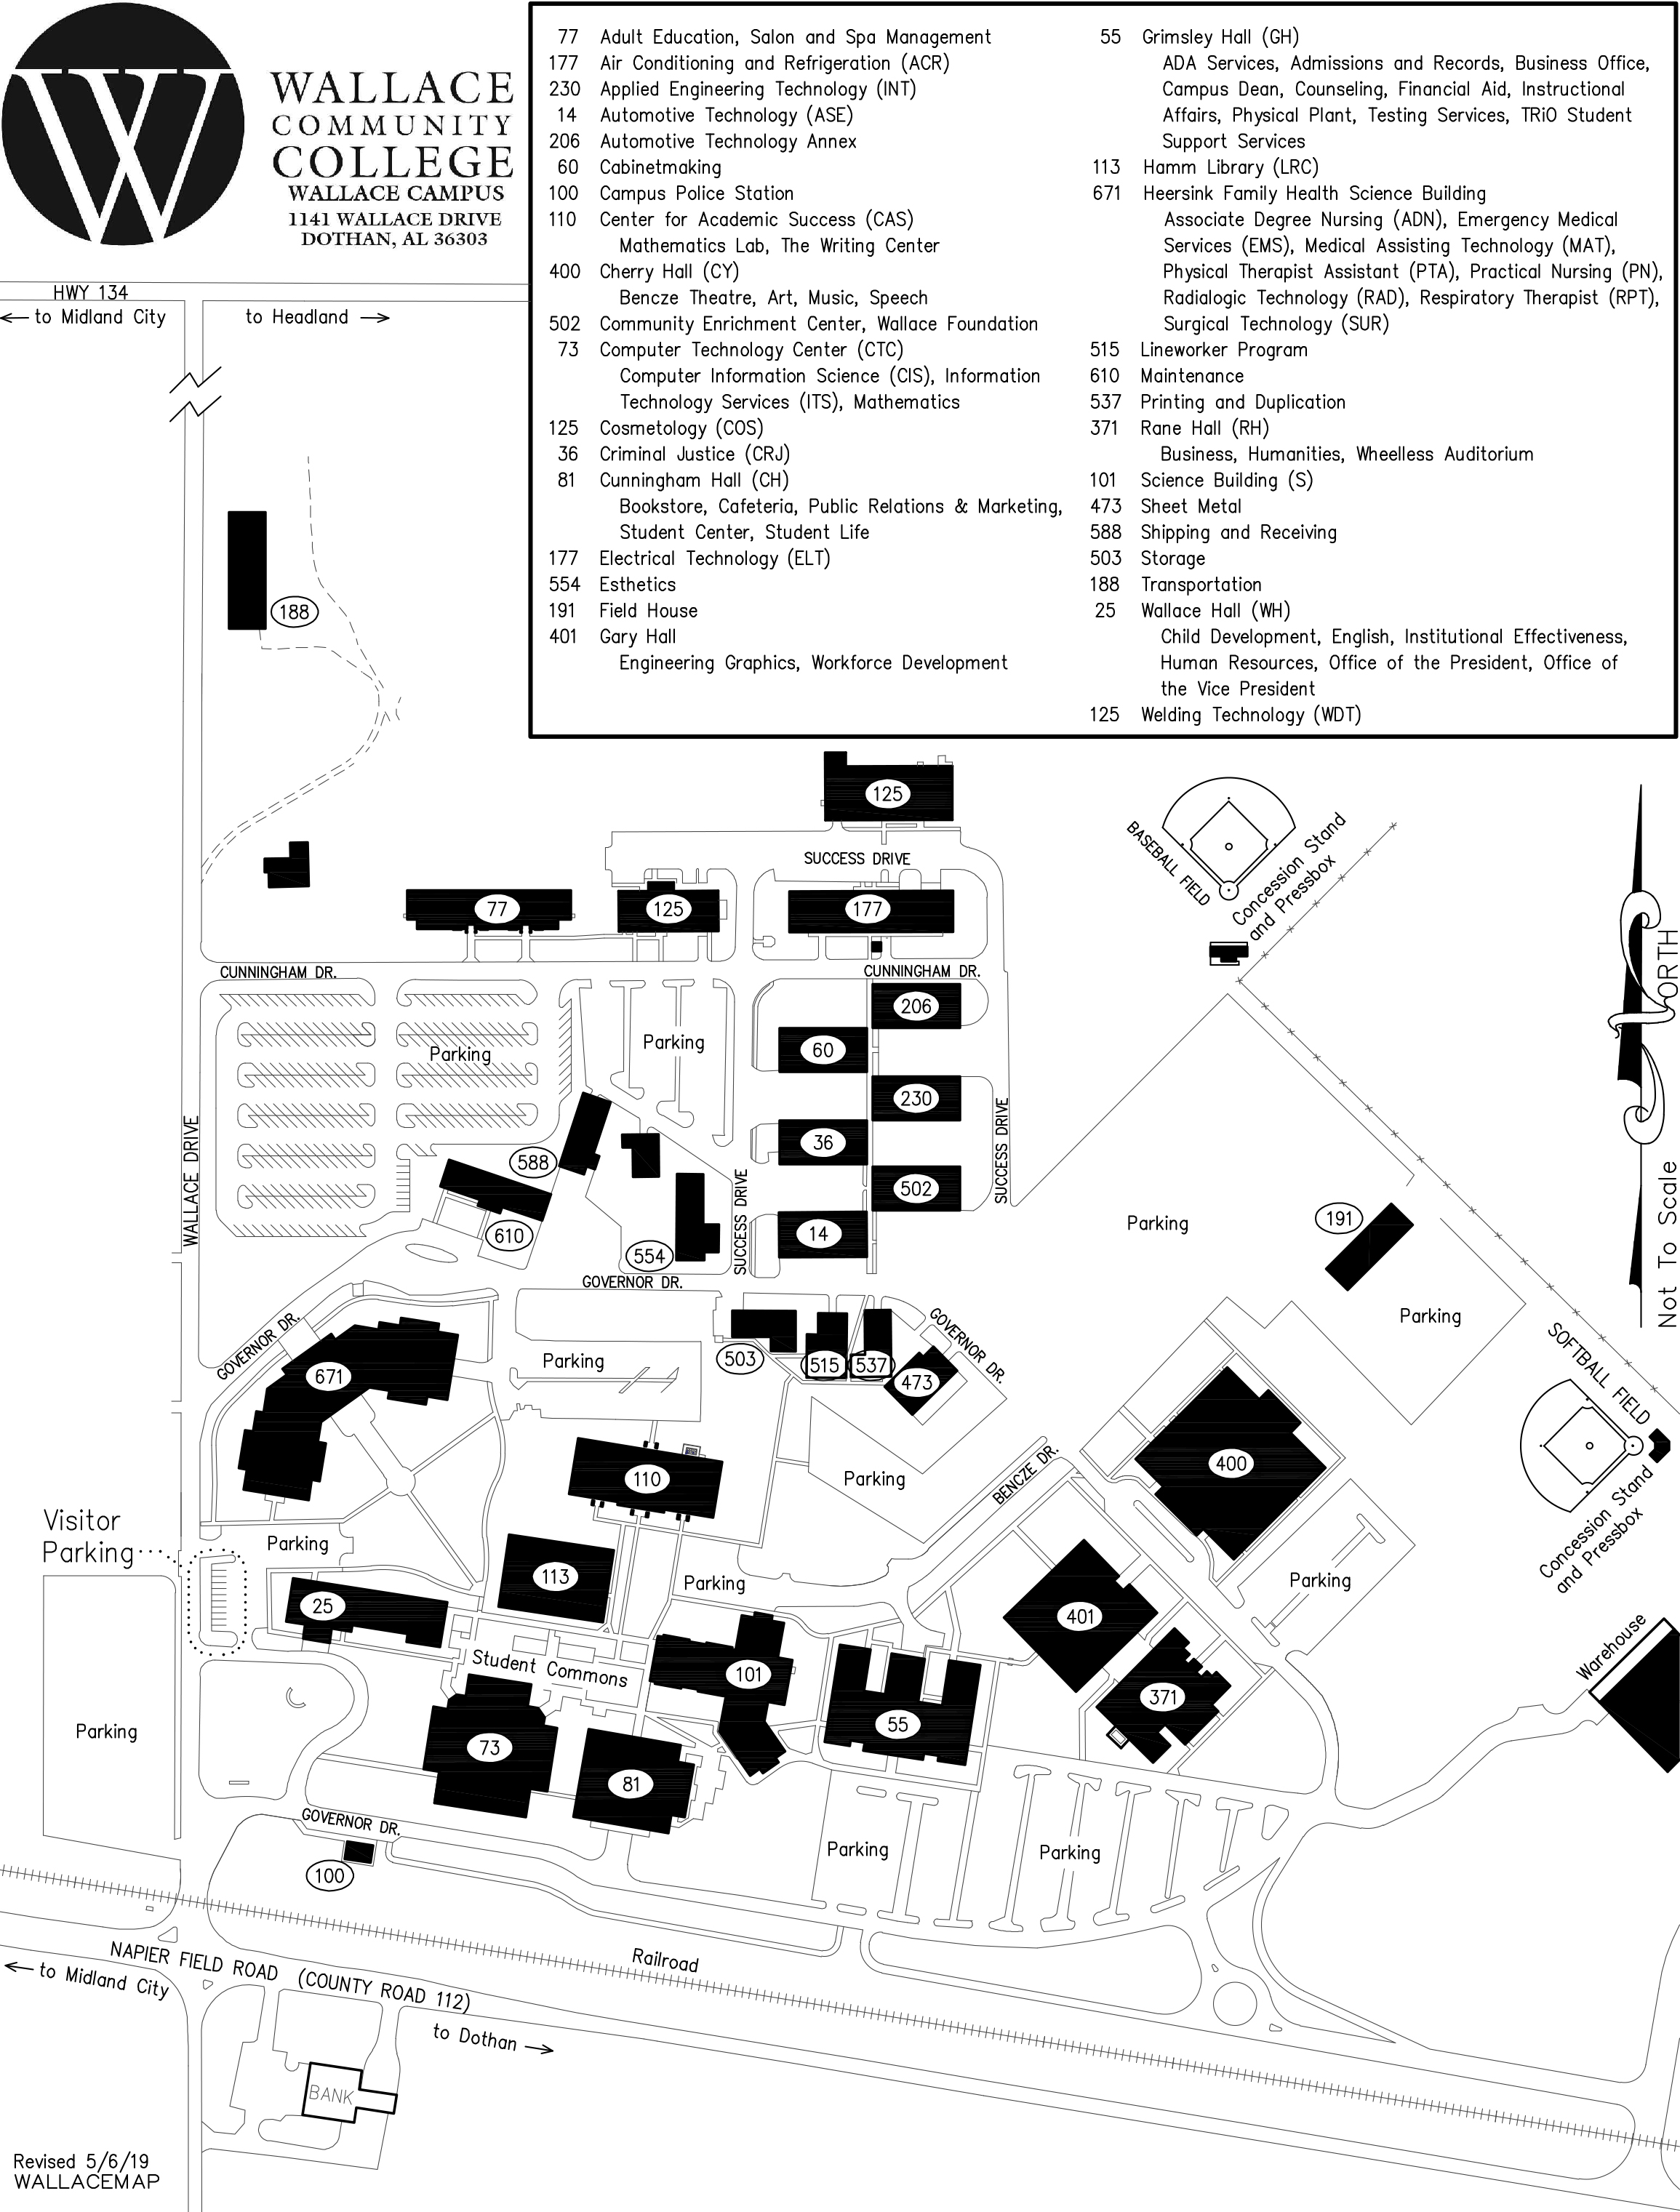 Wallace campus map